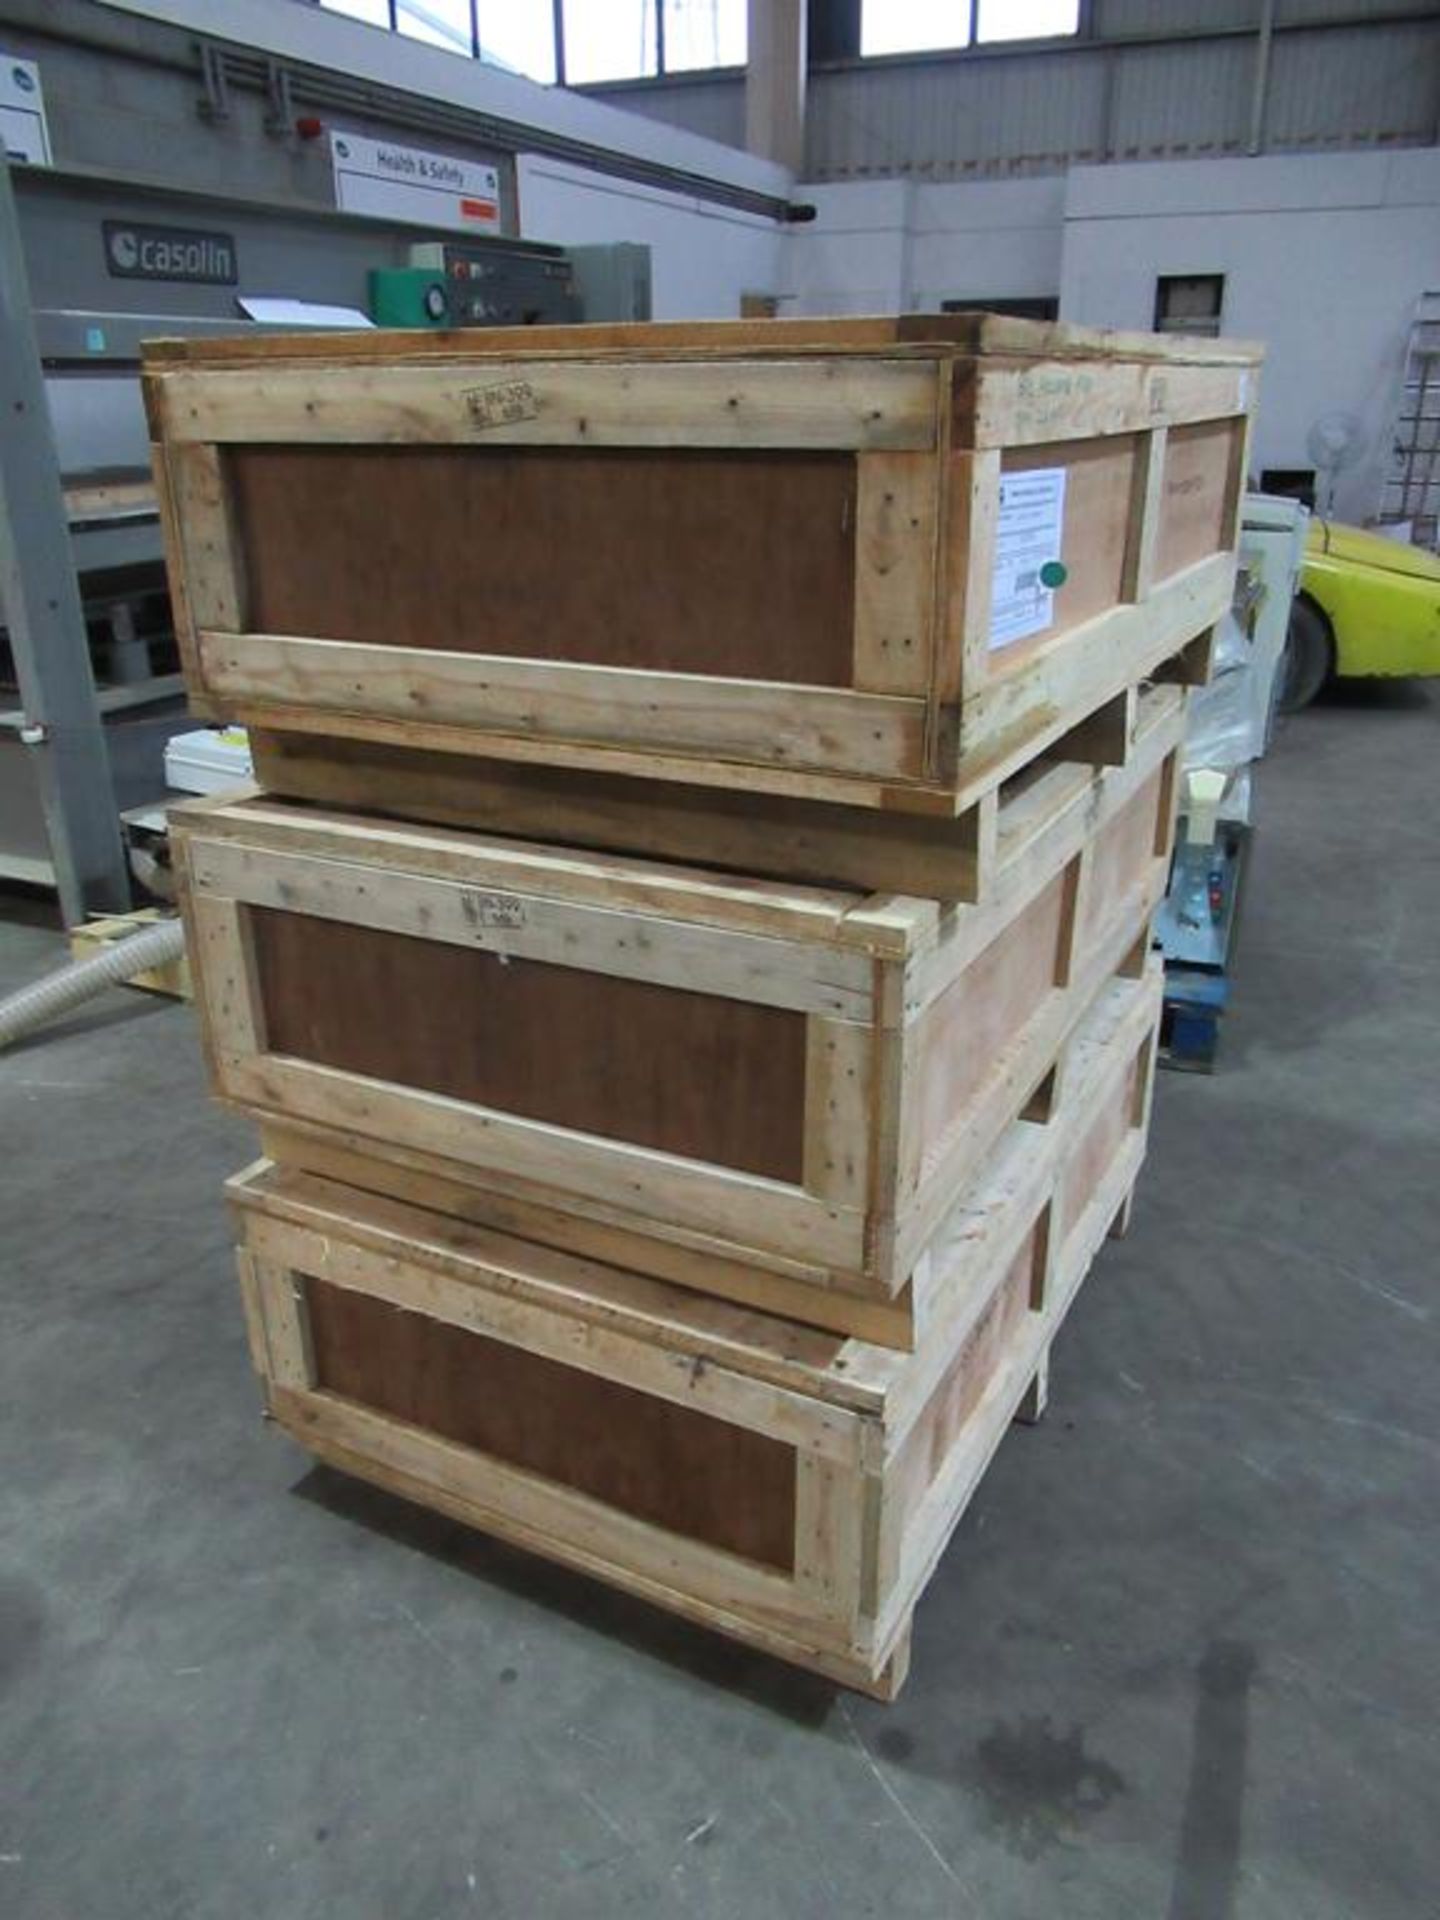 3 x wooden storage boxes - Image 2 of 3